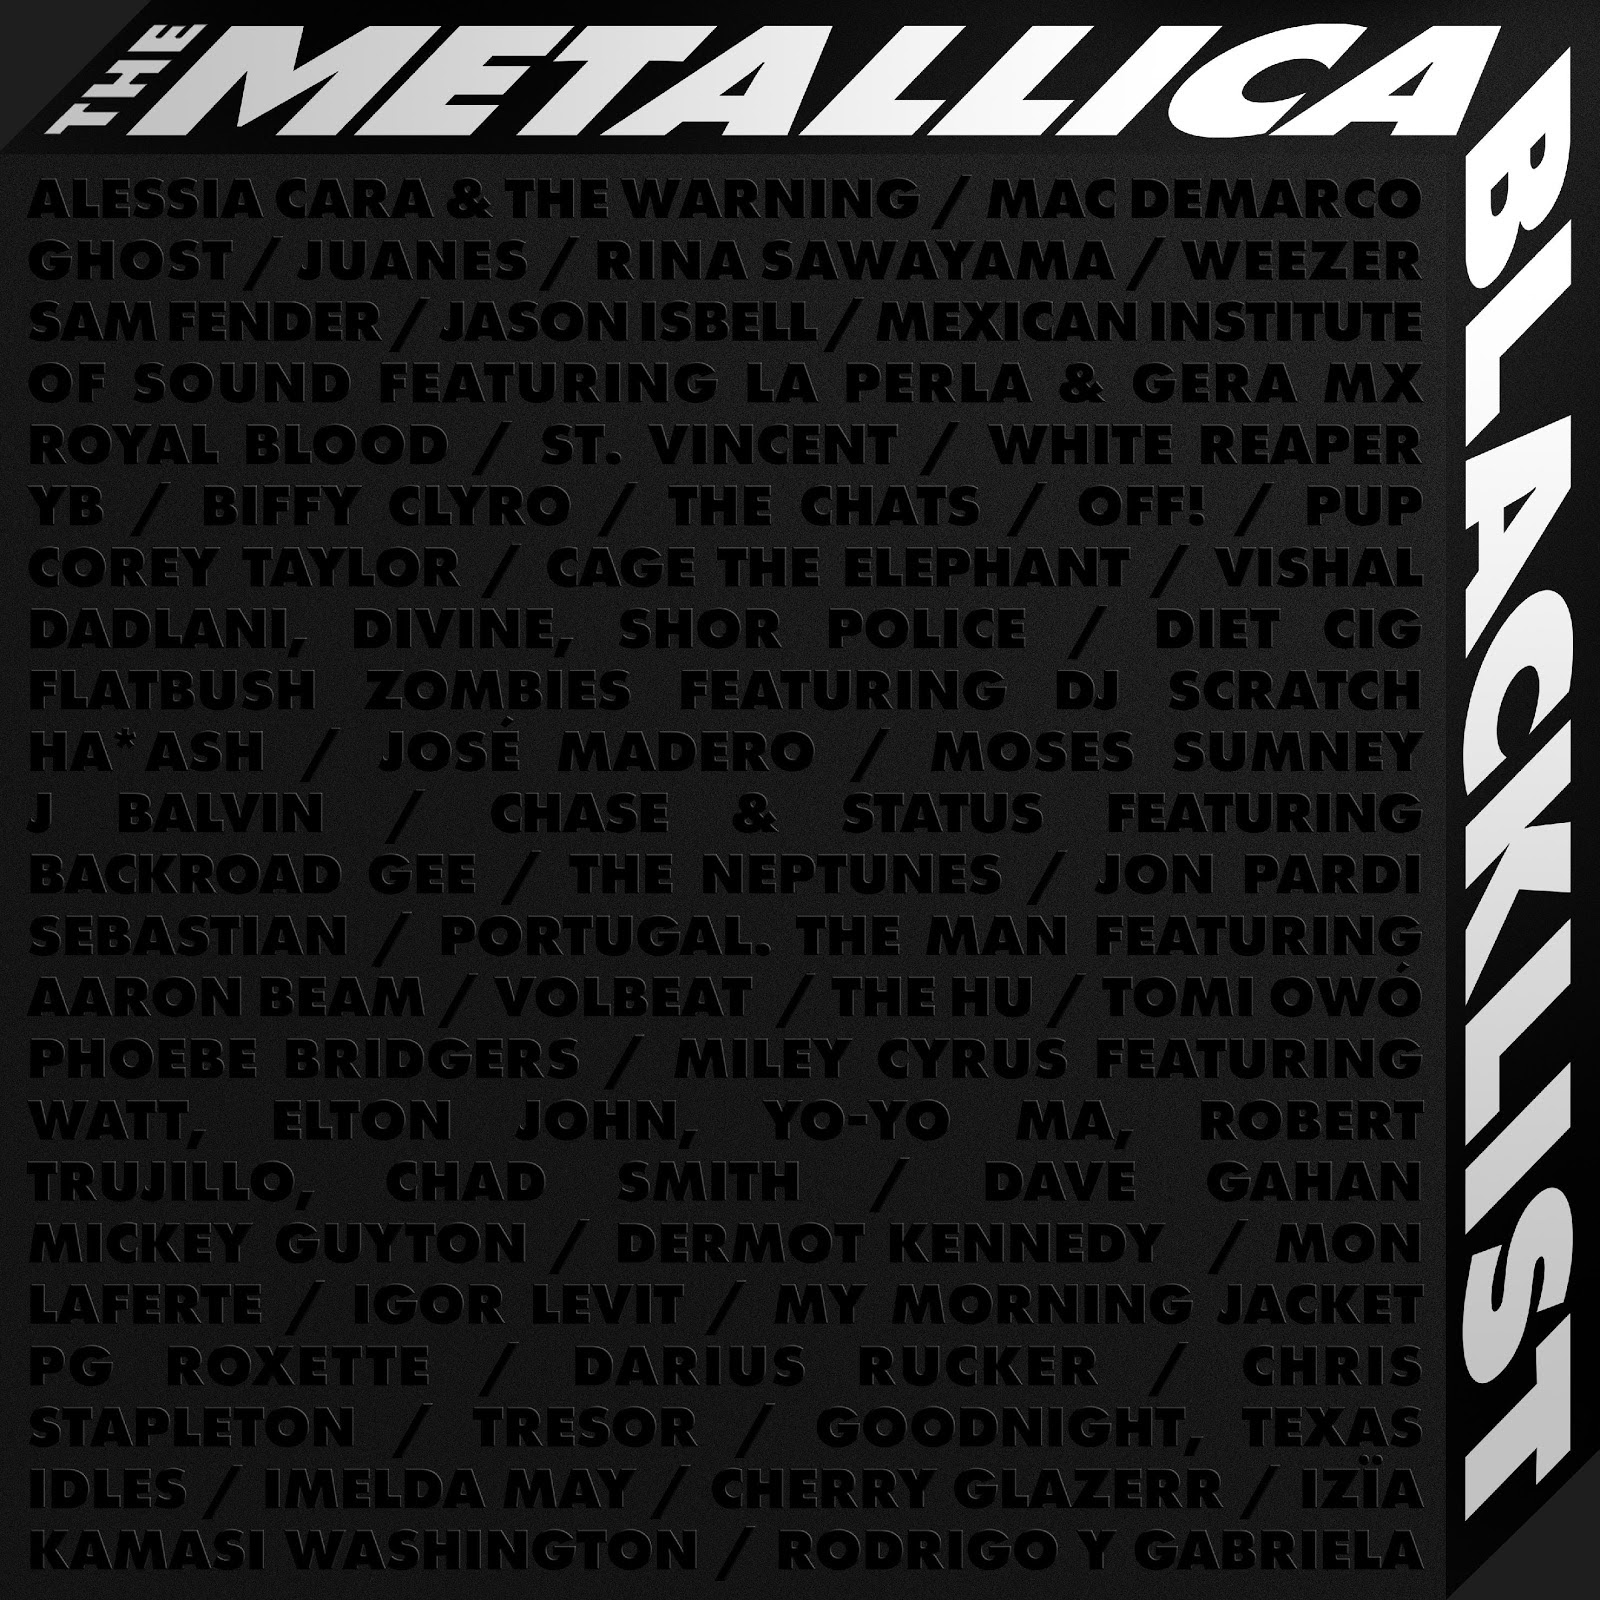 METALLICA 36" black beach ball BRAND NEW!! Dropped at the end of their shows